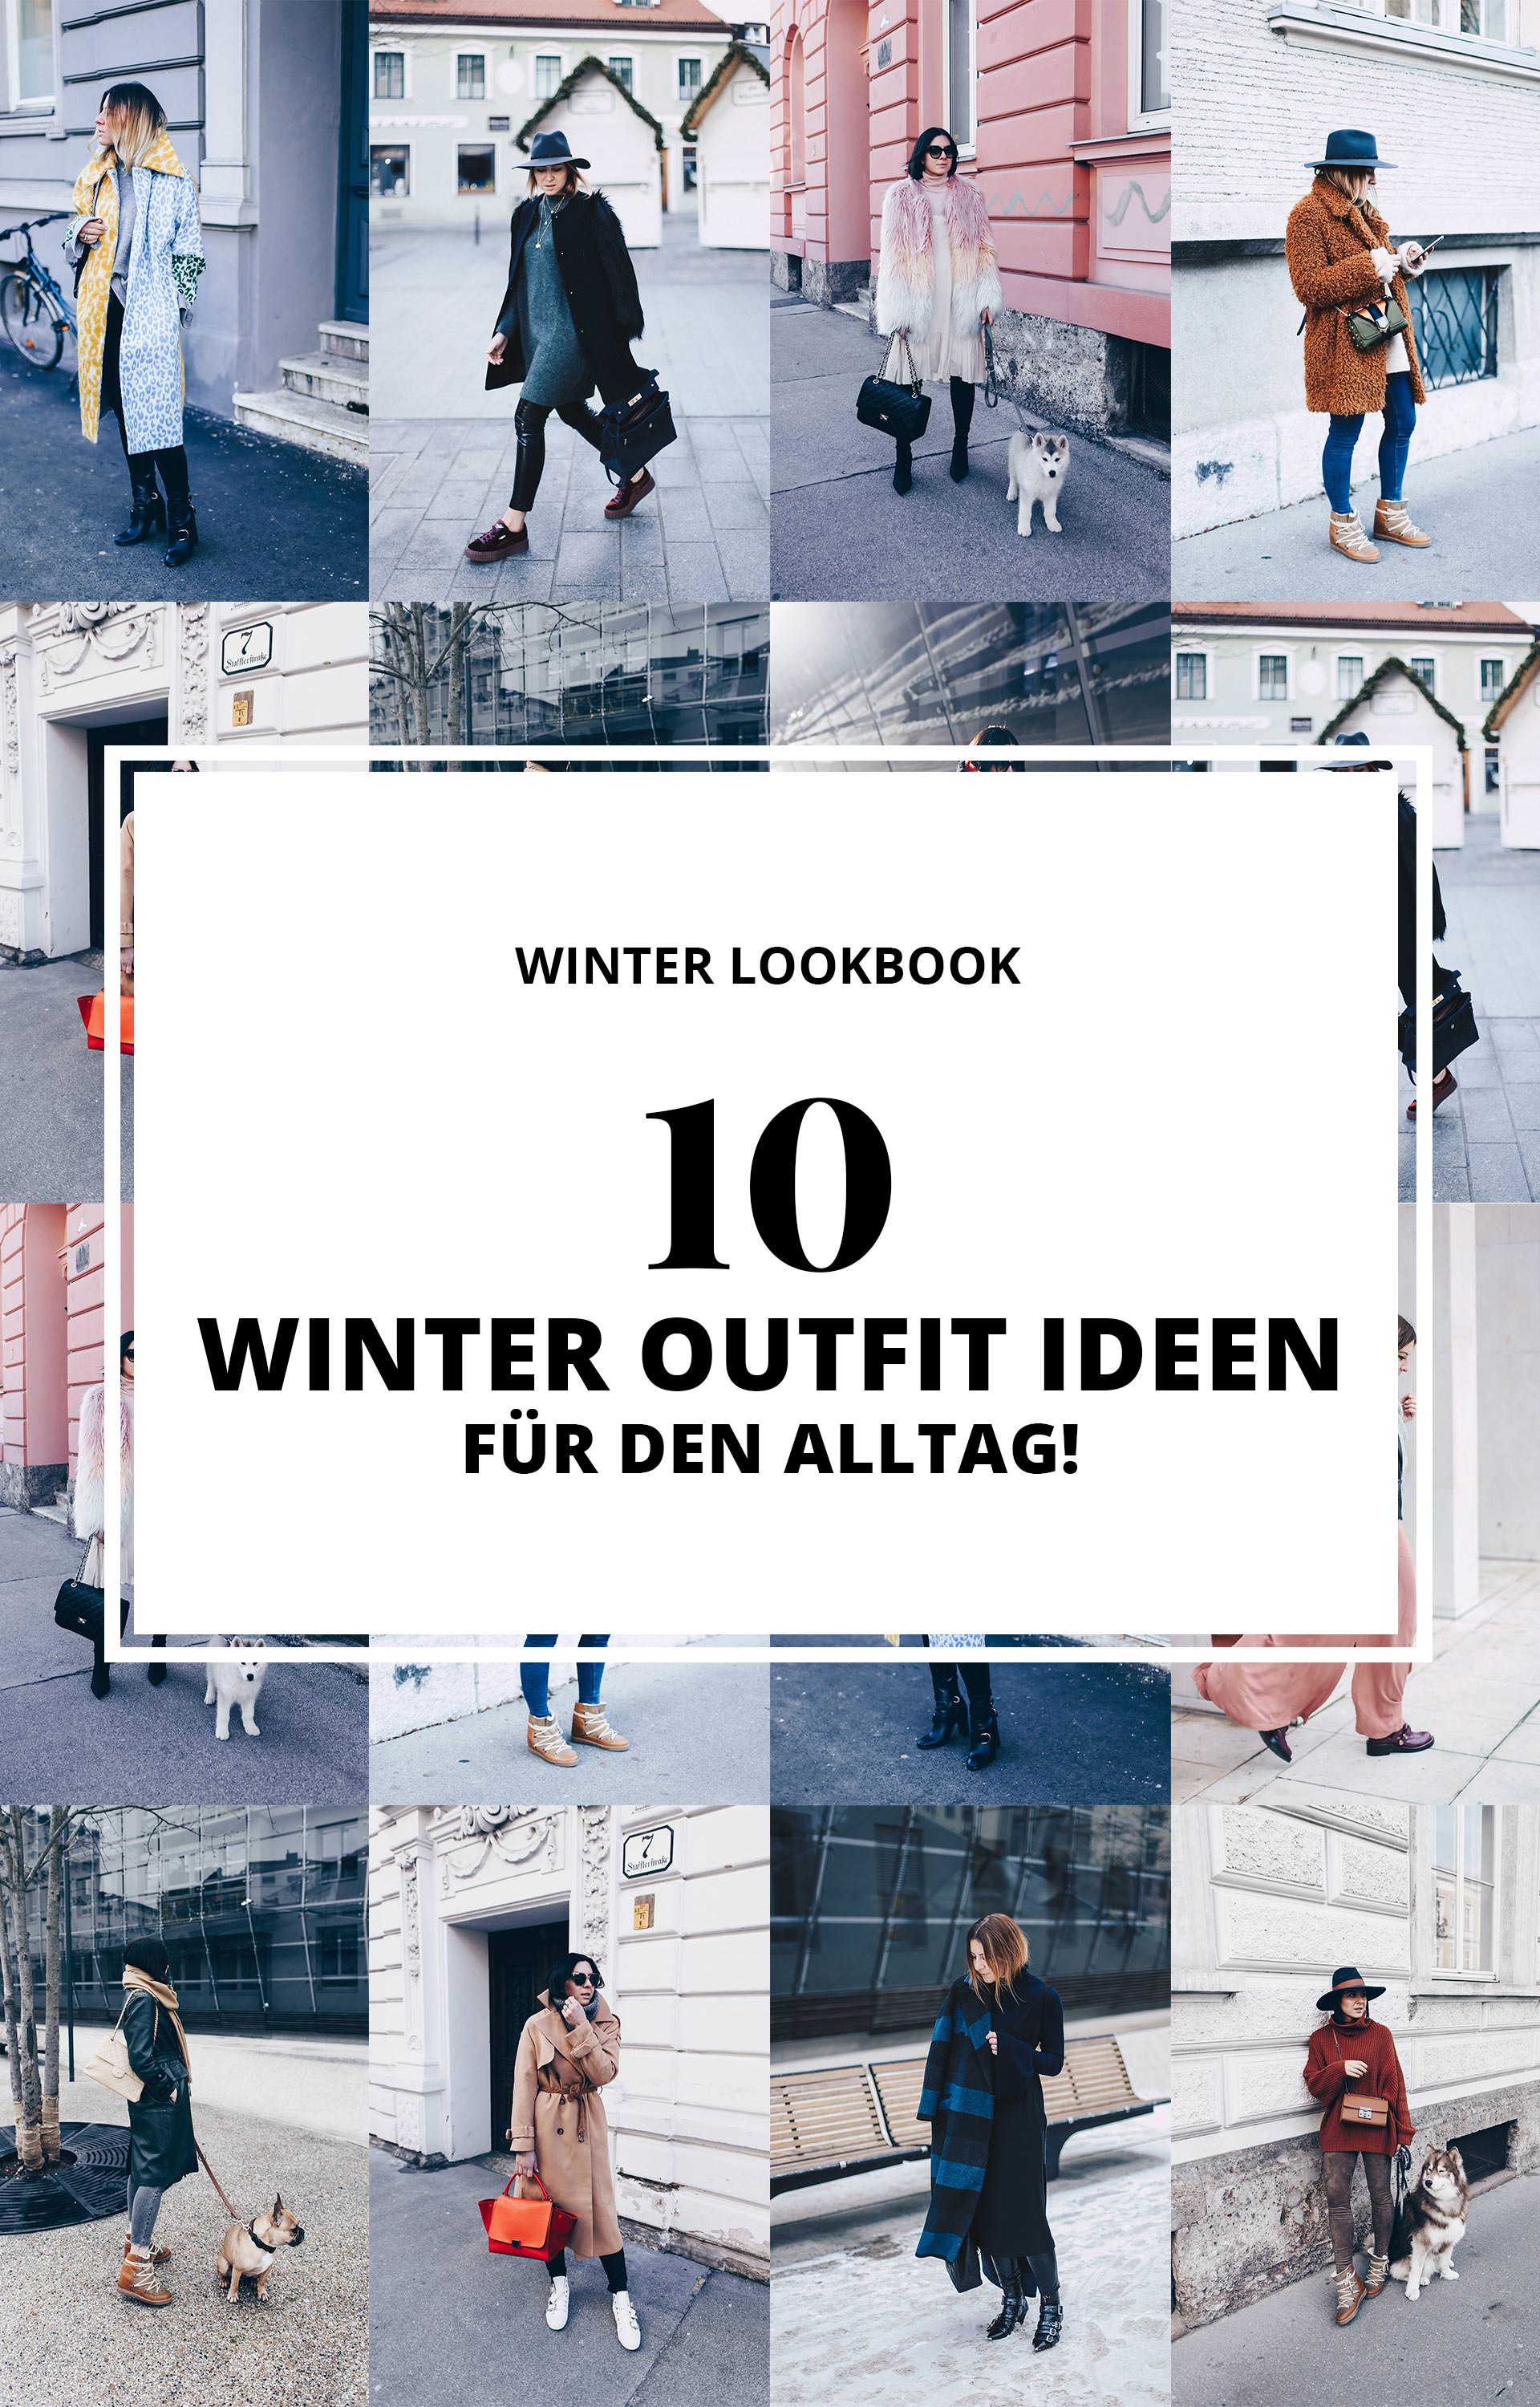 Winter Outfits Lookbook, Winter Outfit Ideen für Alltagsoutfits, Basic Casual Chic Looks im Winter, Streetstyle, Fashion Blog, Modeblog, www.whoismocca.com